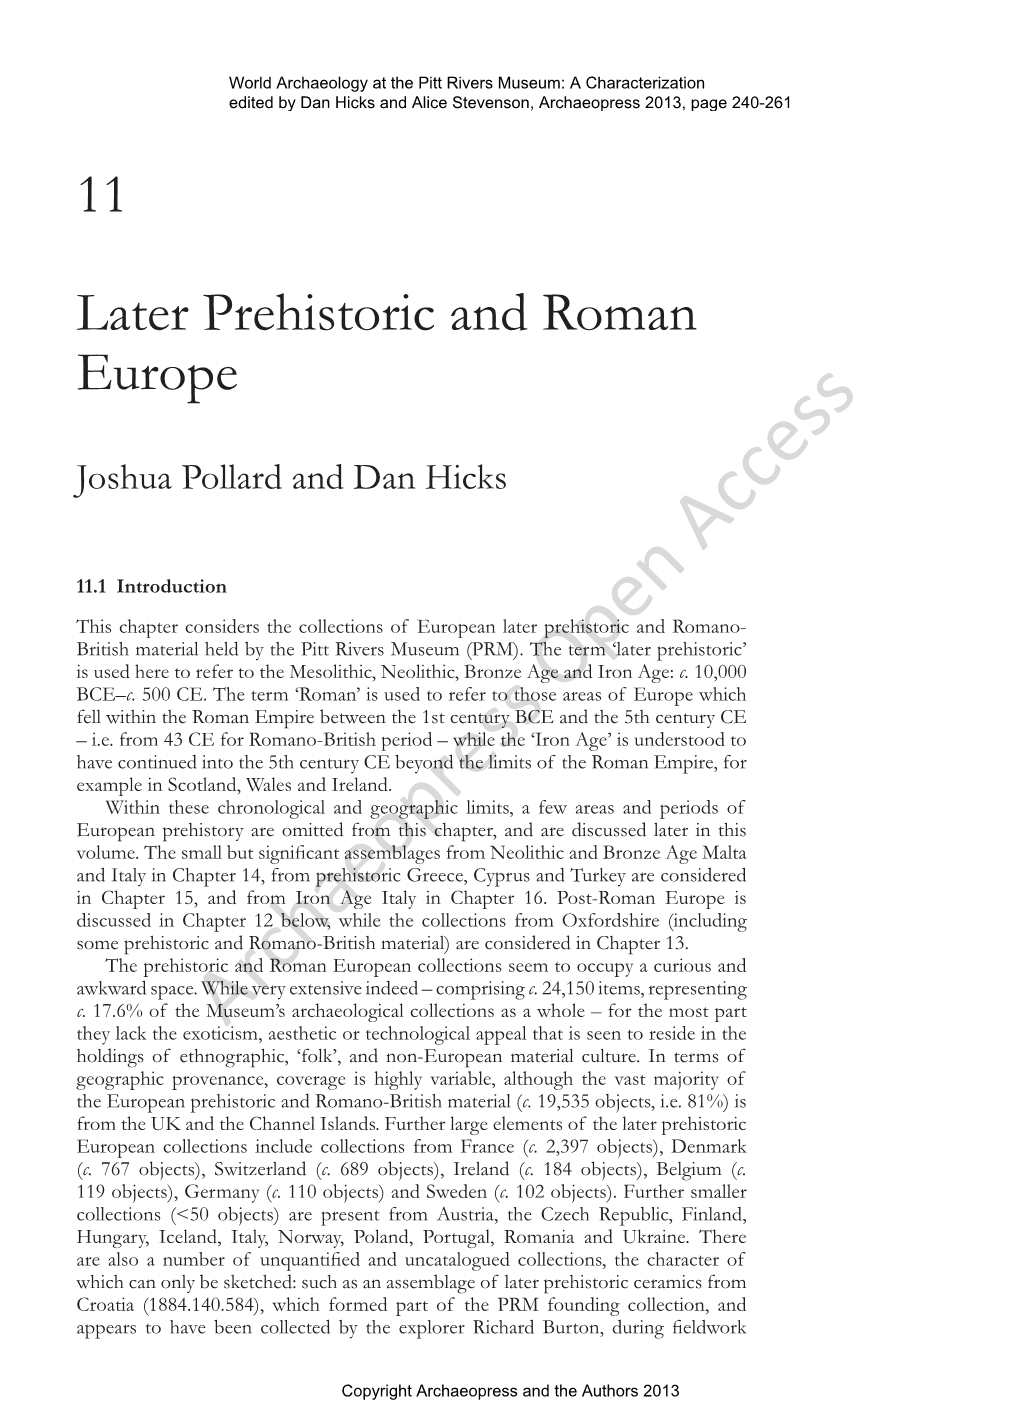 Later Prehistoric and Roman Europe